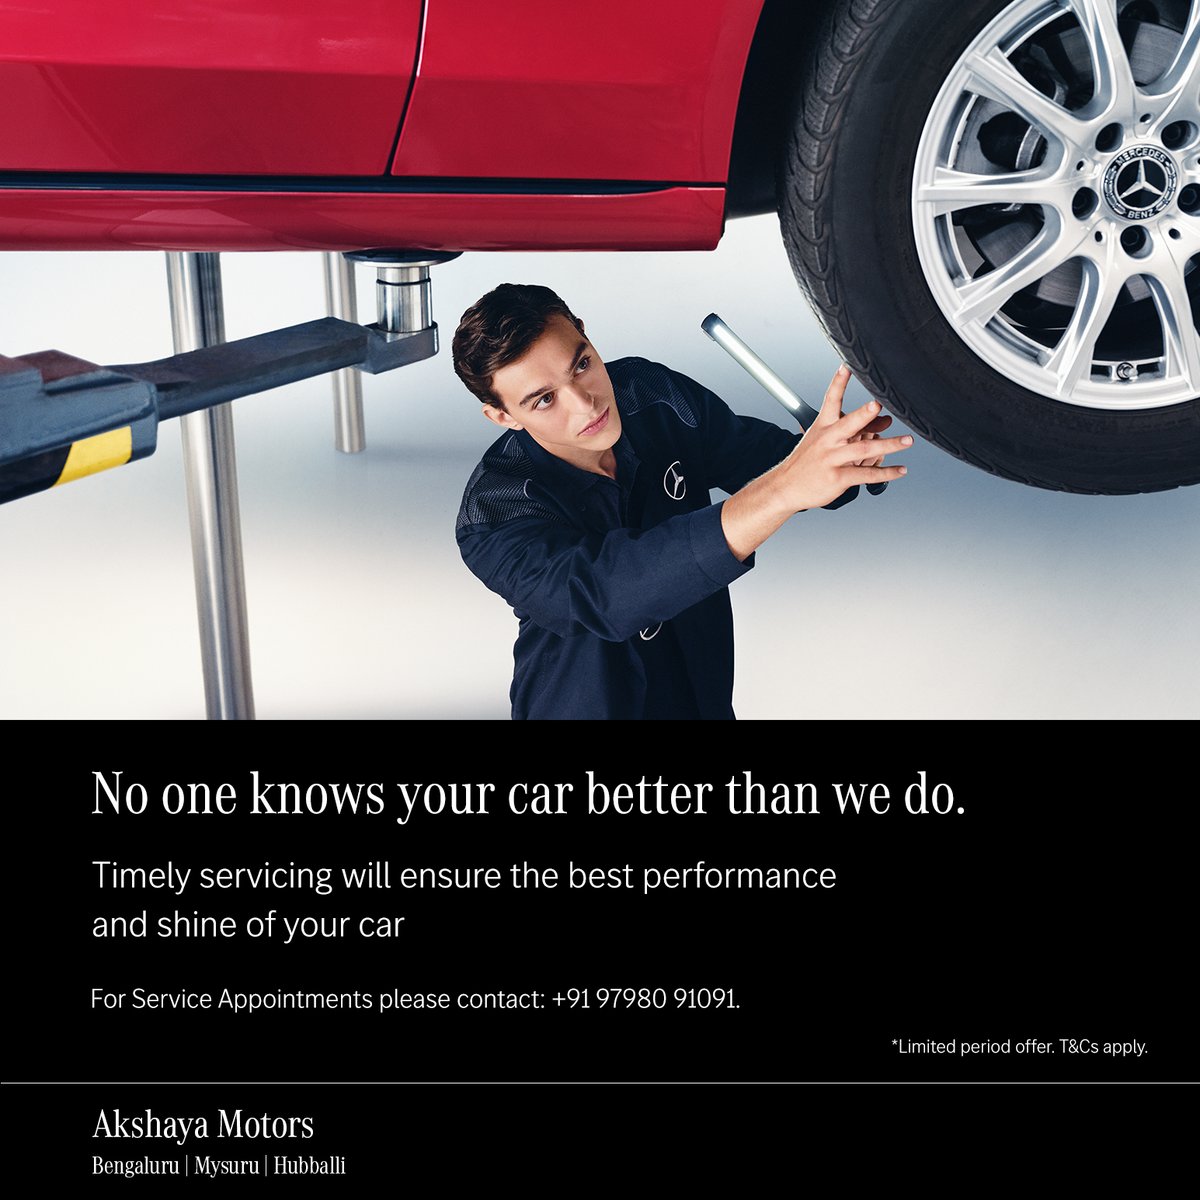 No one knows your car better than we do!!

For Service Appointments please contact: +91 97980 91091.

#MercedesBenzIndia #MercedesBenz #AkshayaMotorsMercedesBenz #AkshayaMotors #Bengaluru #Mysuru #Hubballi #MercedesBenzService #ServiceOffer